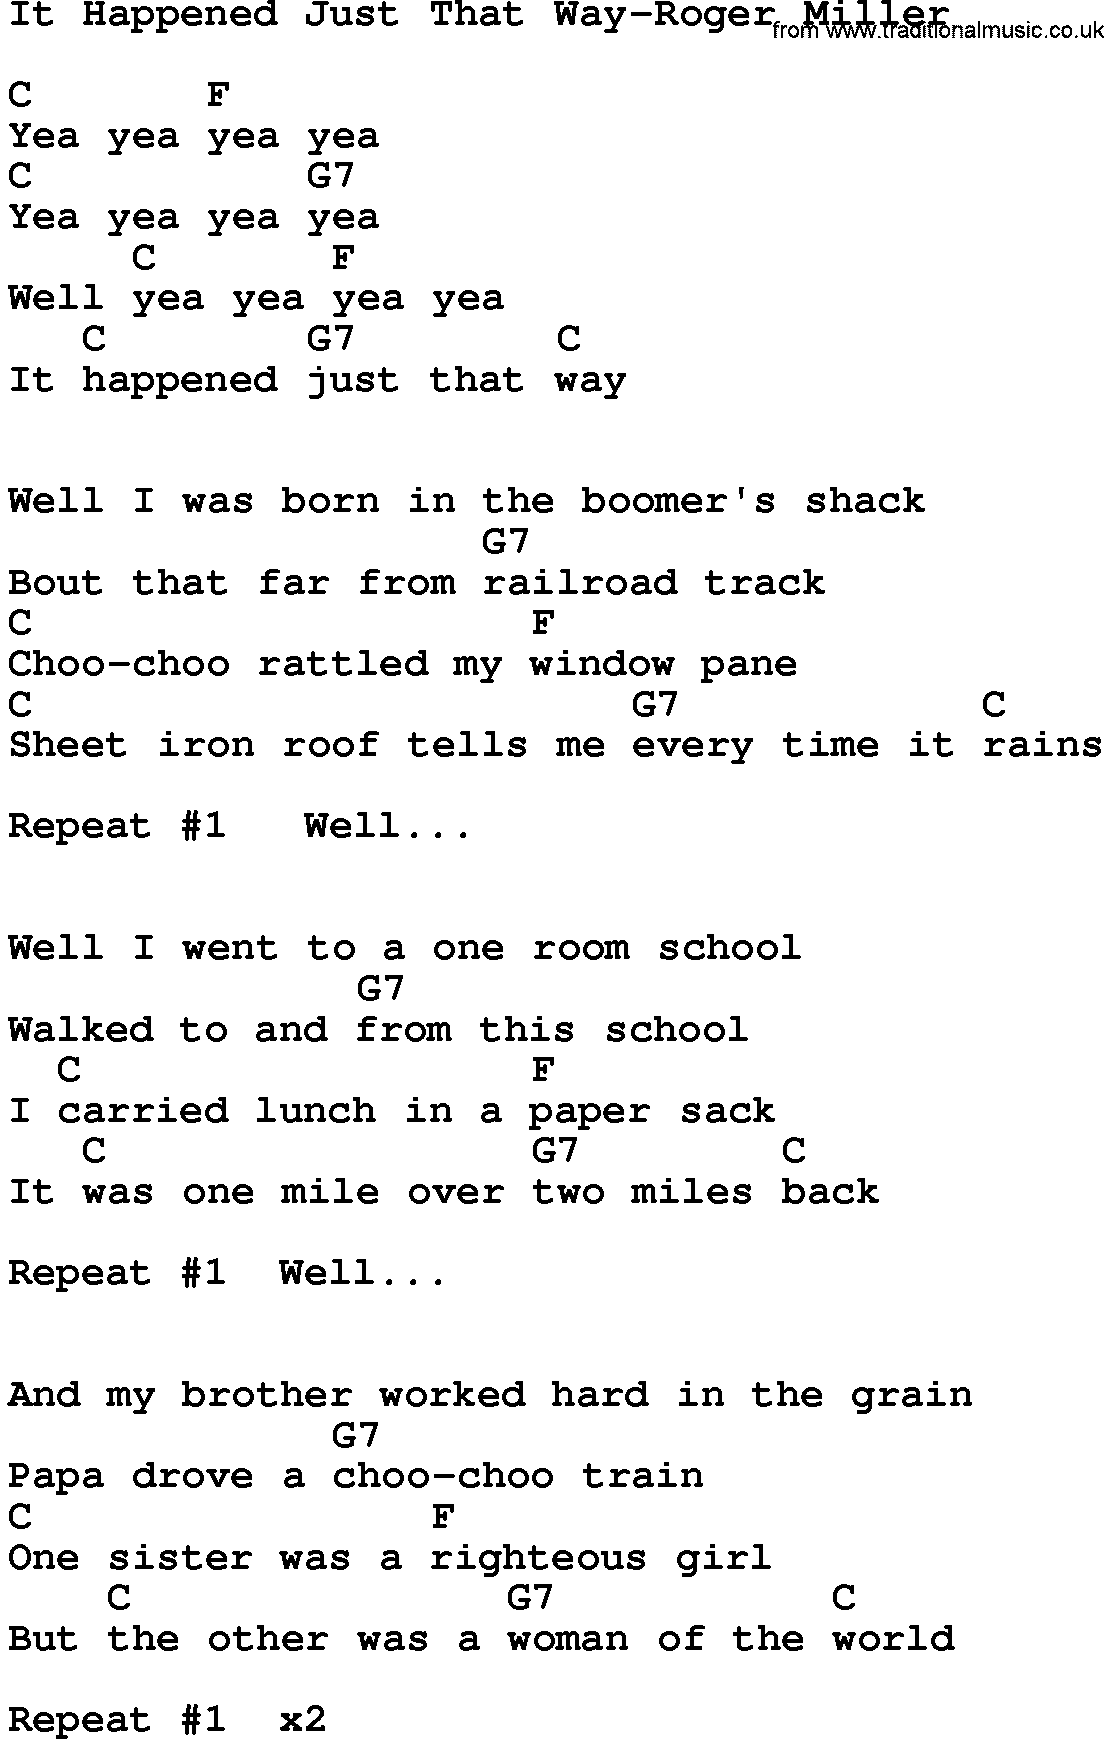 Country music song: It Happened Just That Way-Roger Miller lyrics and chords